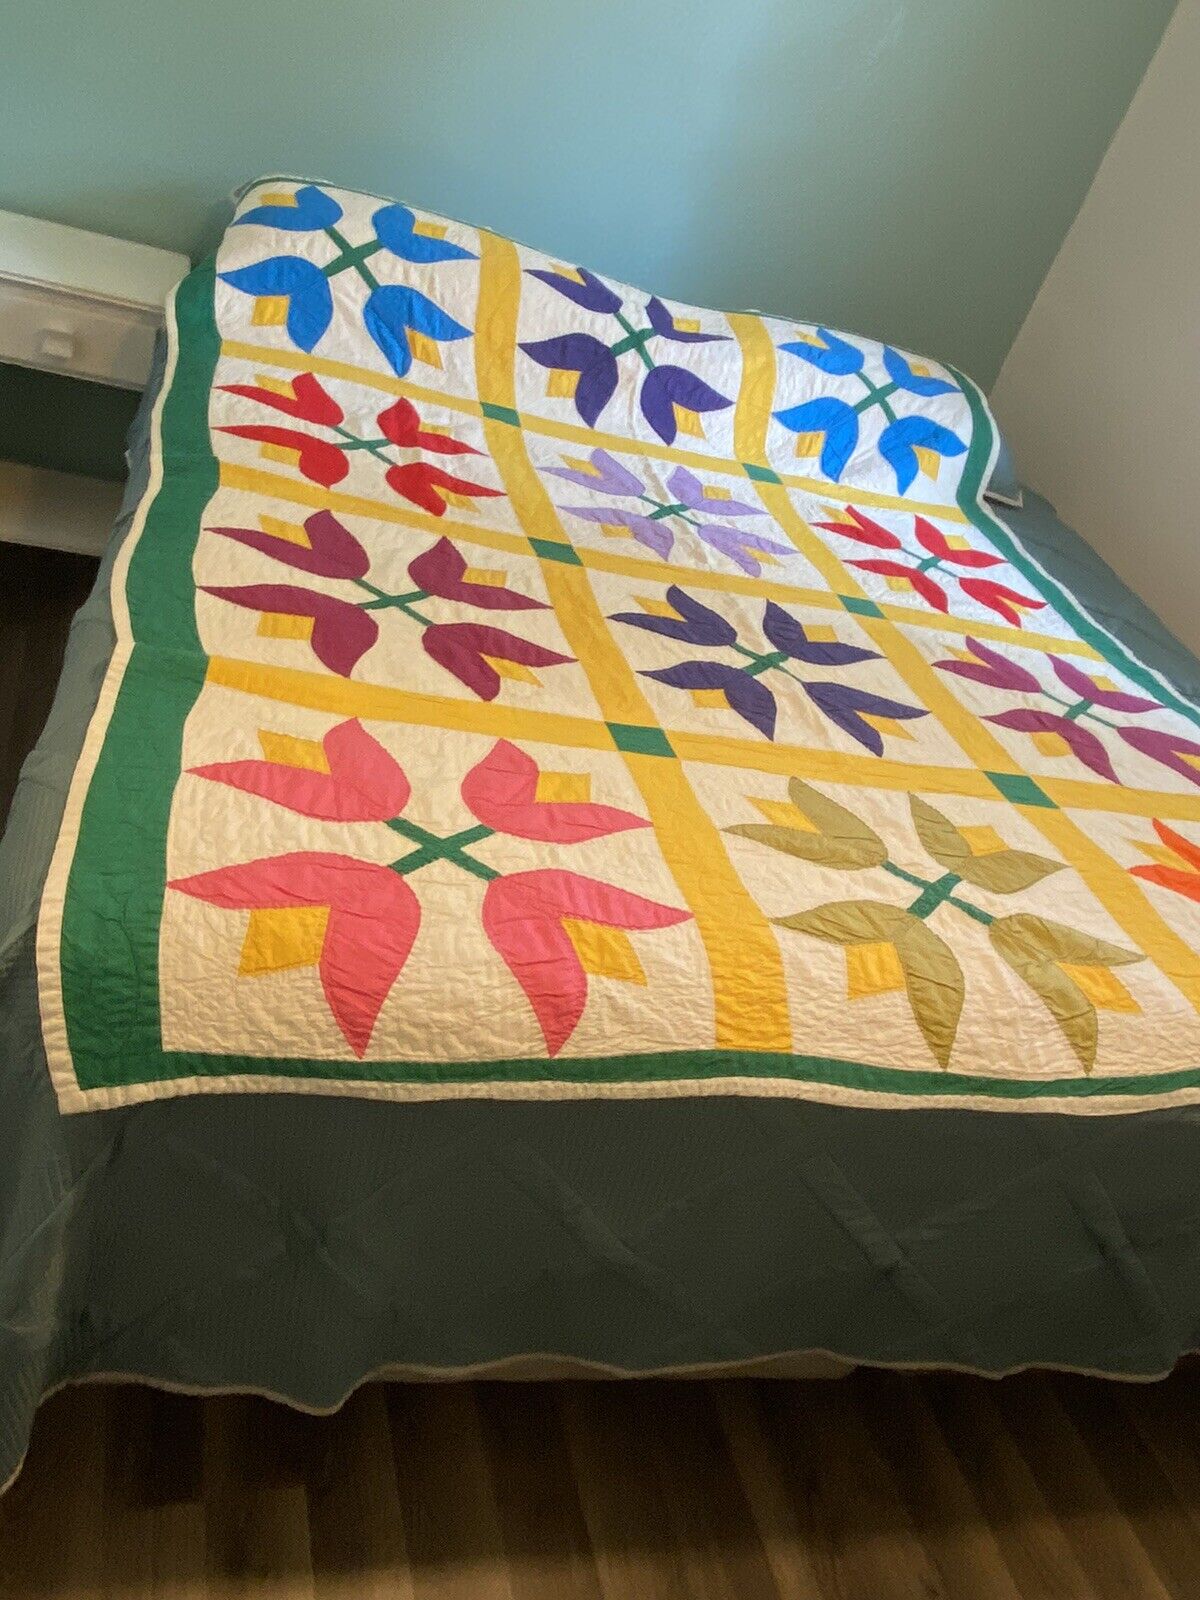 HAND QUILTED-APPLIQUÉ QUILT “ANTIQUE” ABSOLUTELY GORGEOUS. TULIPS